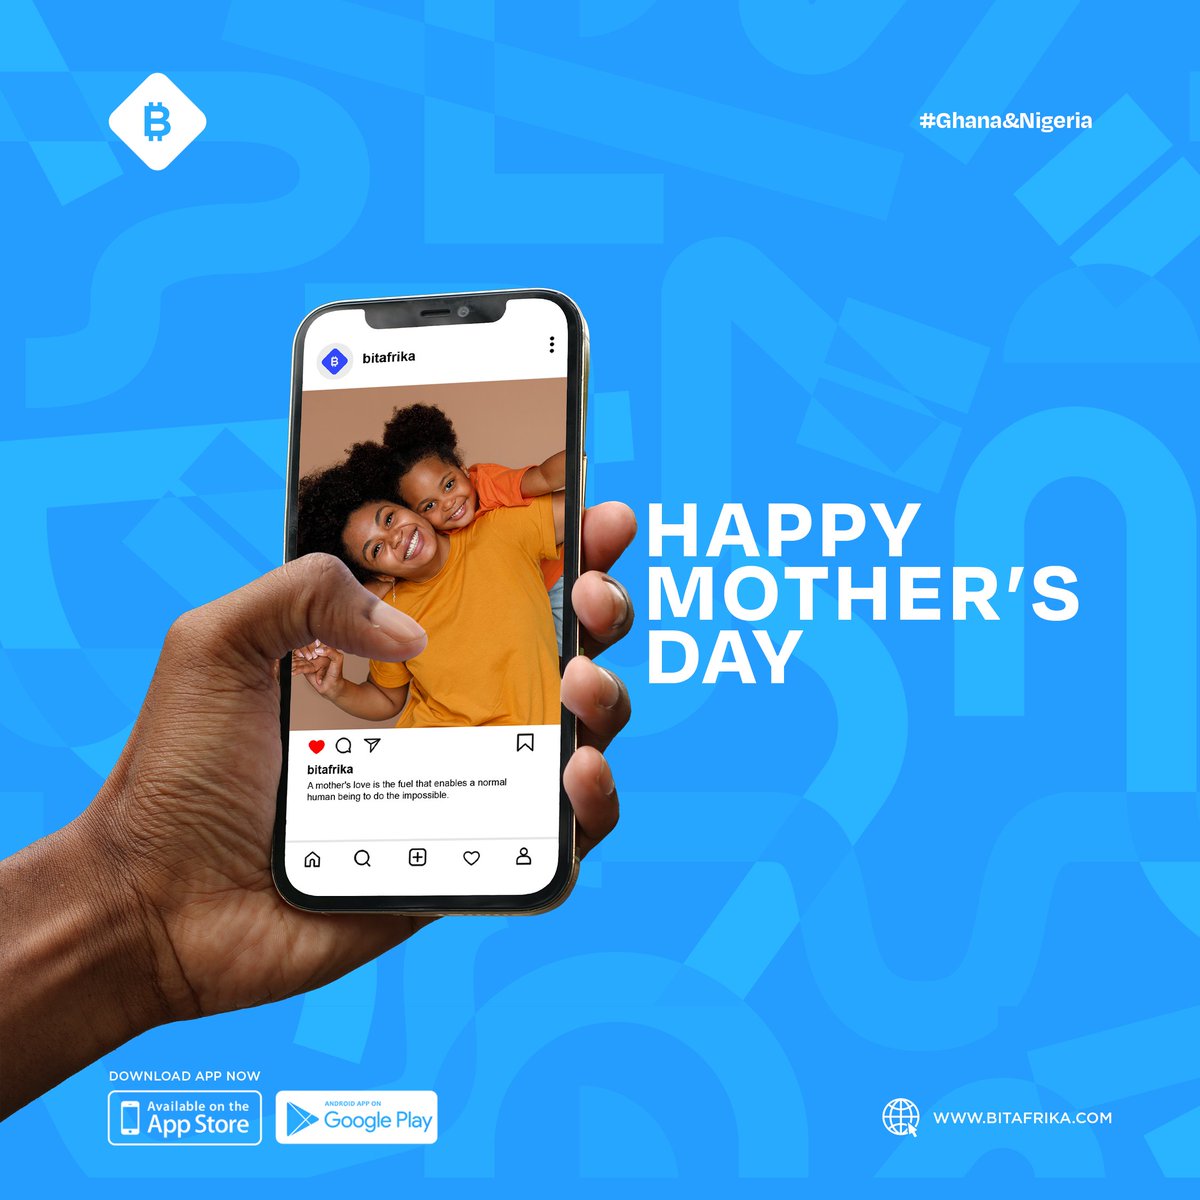 Moms are like buttons—they hold everything together. Happy Mother's Day to the woman who keeps our family stitched with love.

Download the bitafrika app on the google play store or apple store now!
#bitafrika #happymothersday❤️ #allwomen